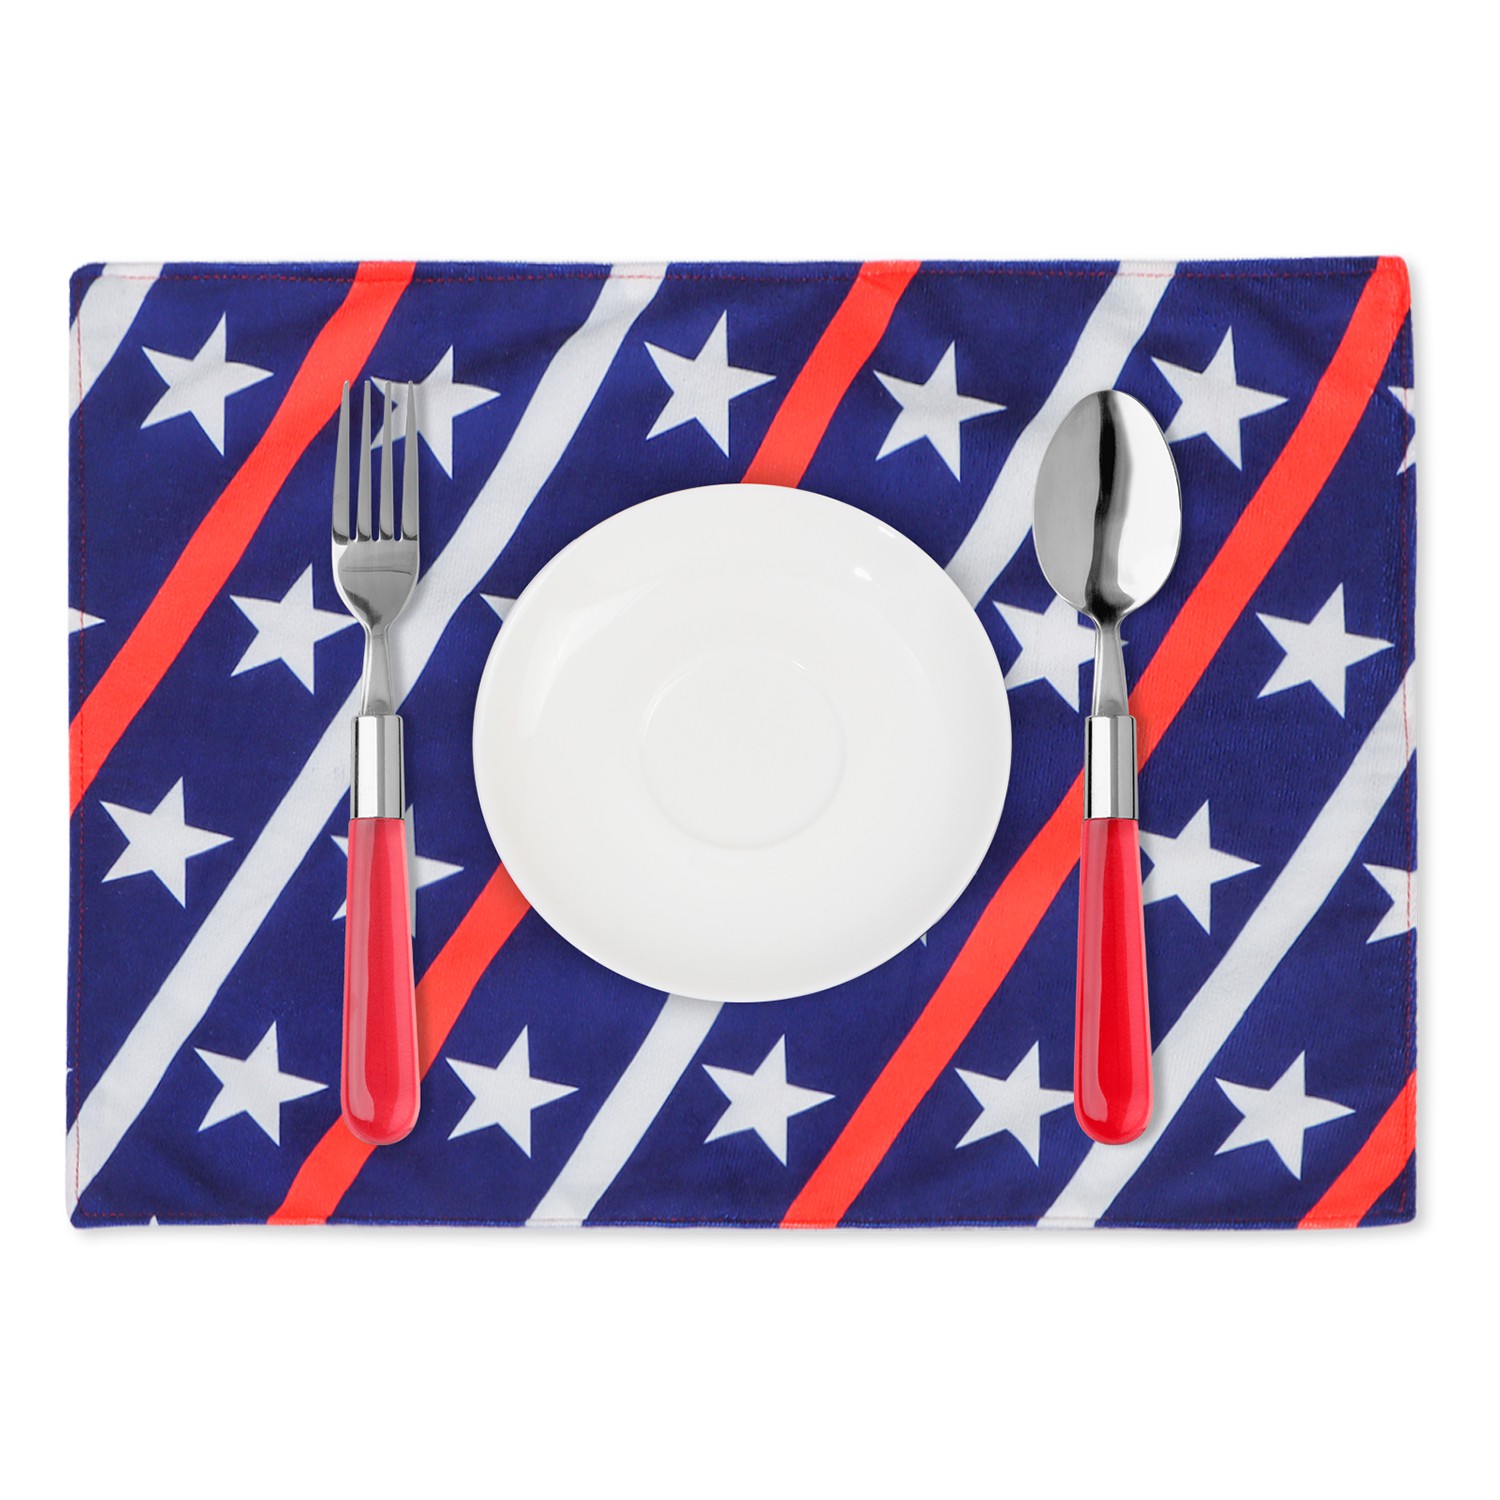 LUCKY 4pcs/set Table Decor Independence Day Heat-Resistant Table Place Mats Placemats Non-Slip Kitchen Rectangle Washable American Flag